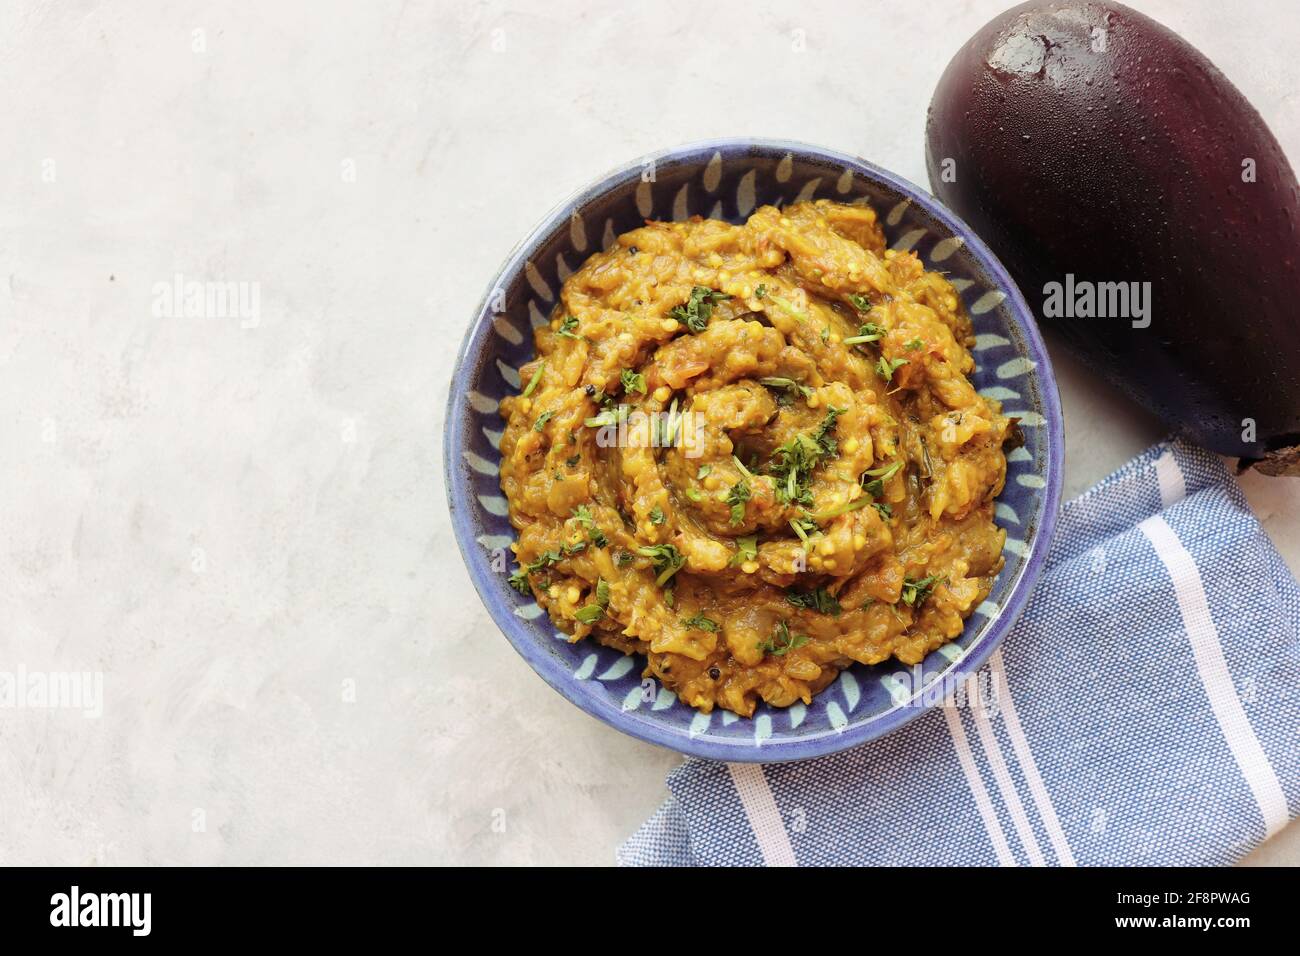 Baigan Bharta, also called Vangyache Bharit in Marathi. It is a roasted eggplant curry. Brinjal chutney. served in a wooden bowl with roti. Stock Photo